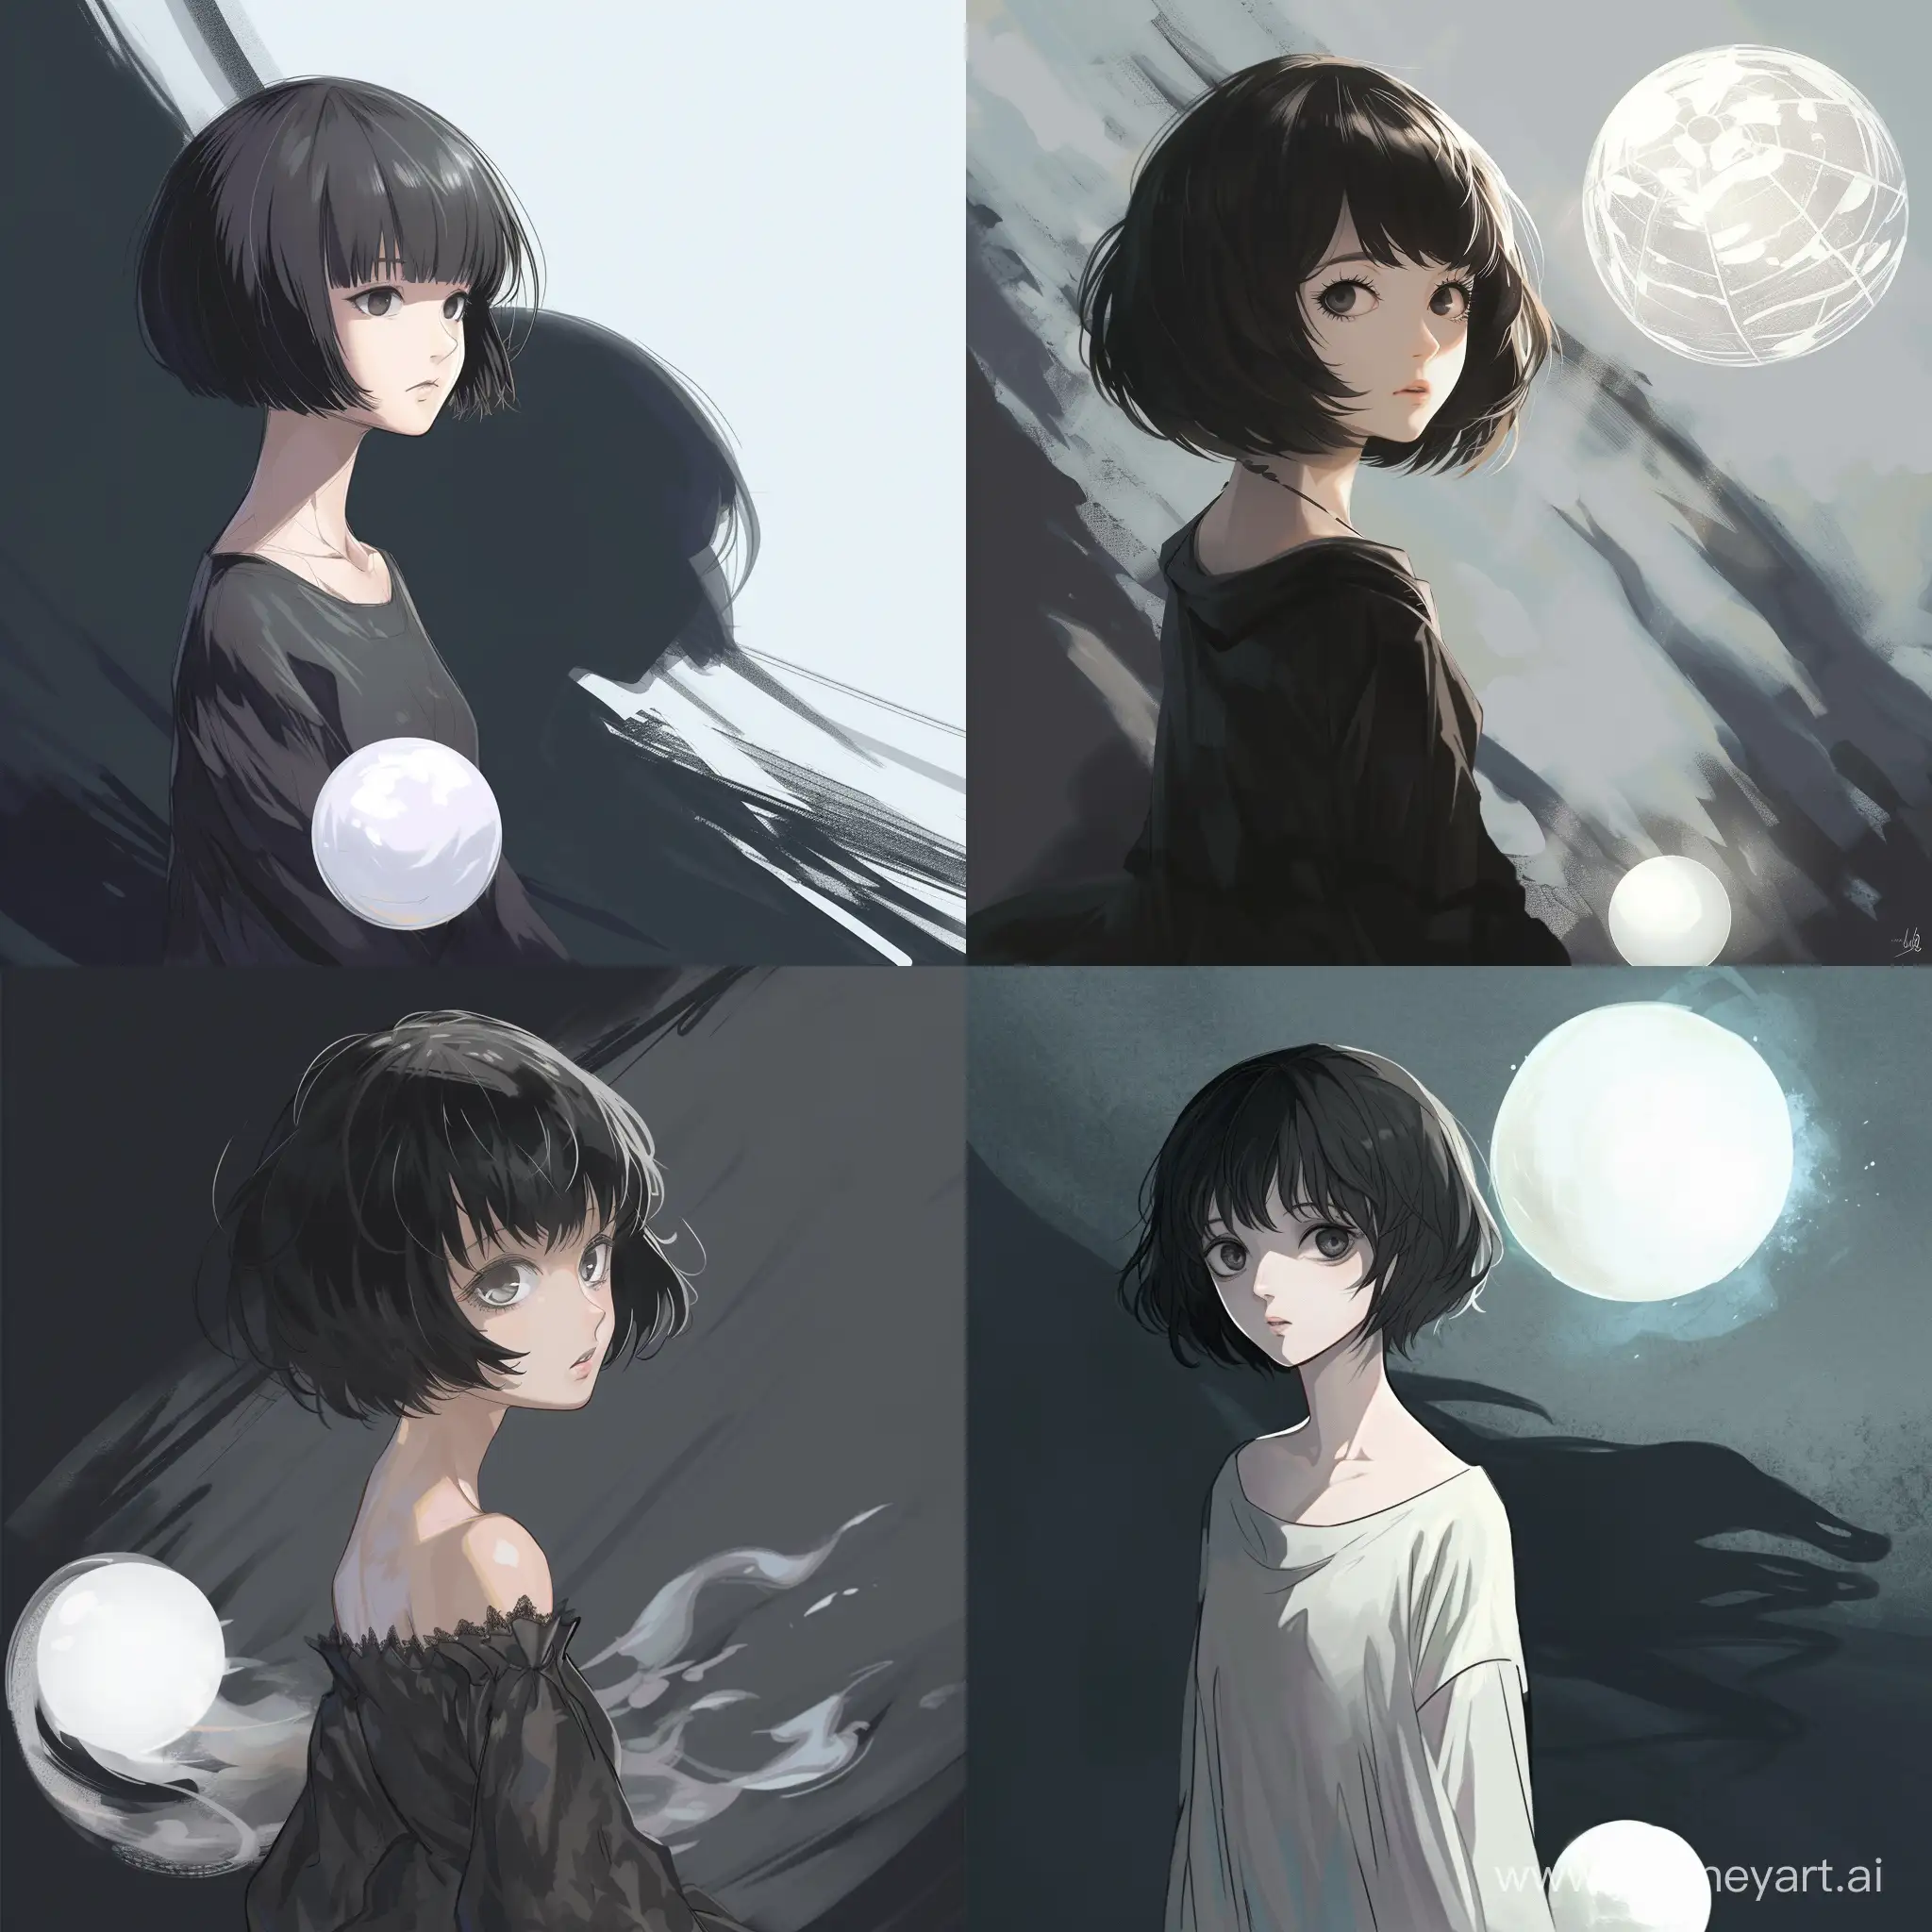 Draw an anime girl with short black hair , Shadow moving in the background and a white light orb beside her